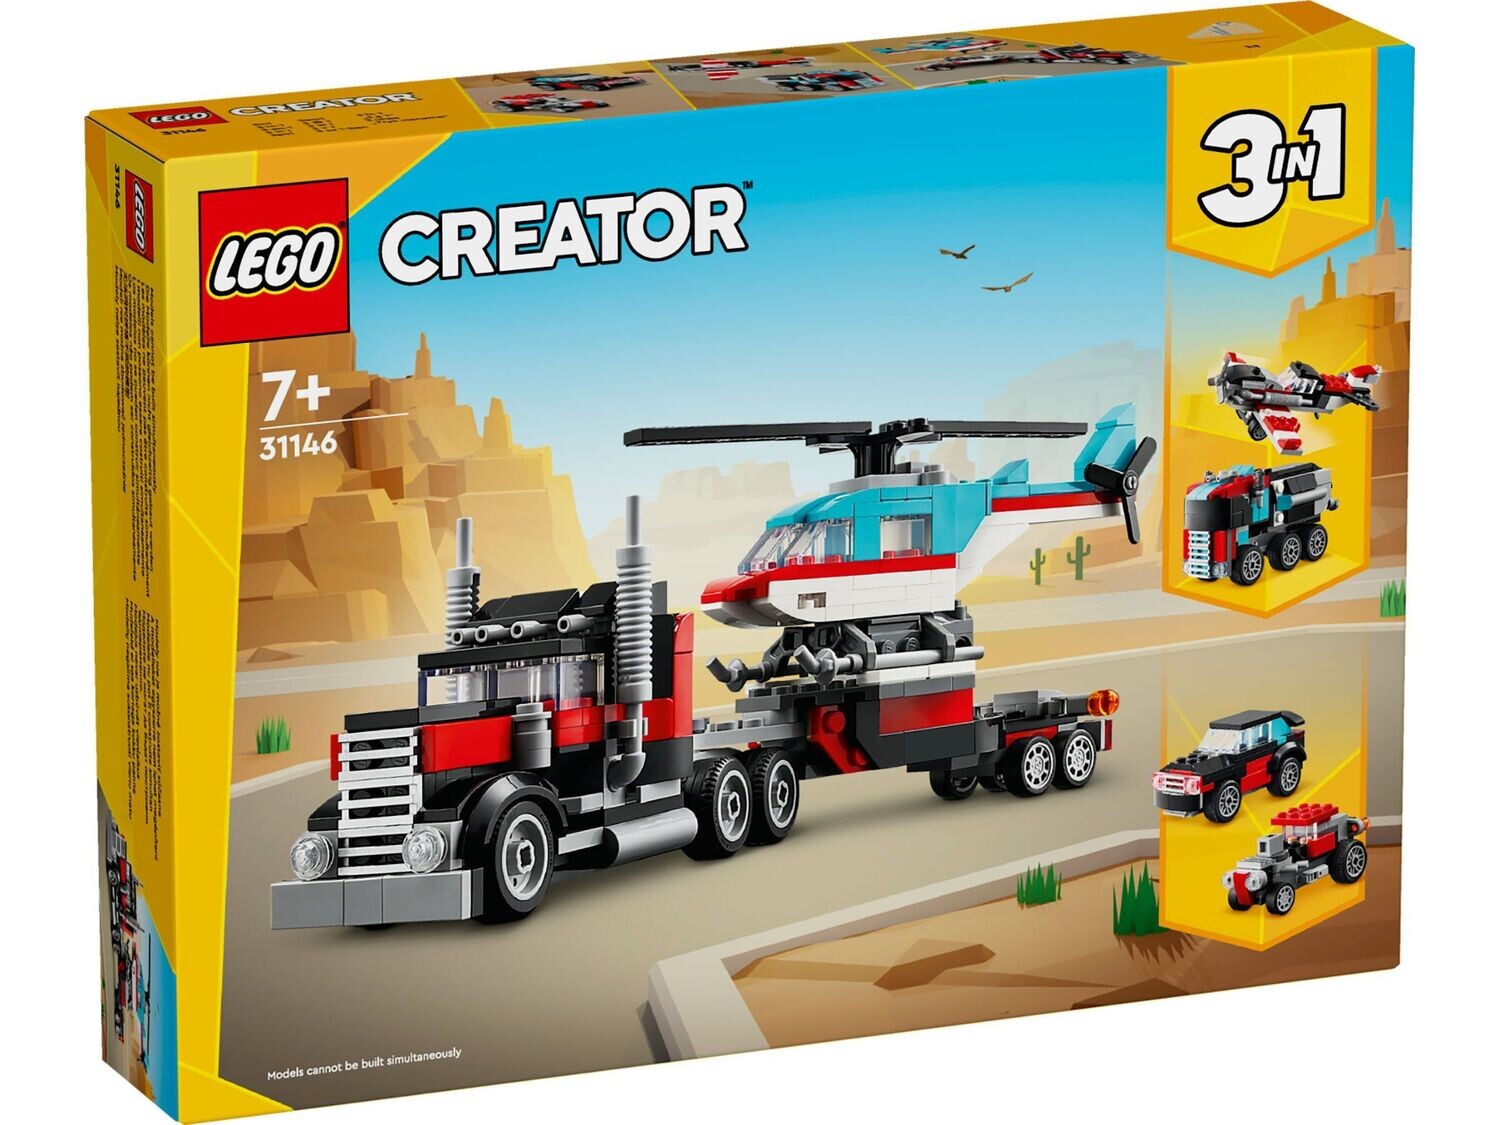 LEGO Creator 3-in-1 31146 - Flatbed Truck with Helicopter